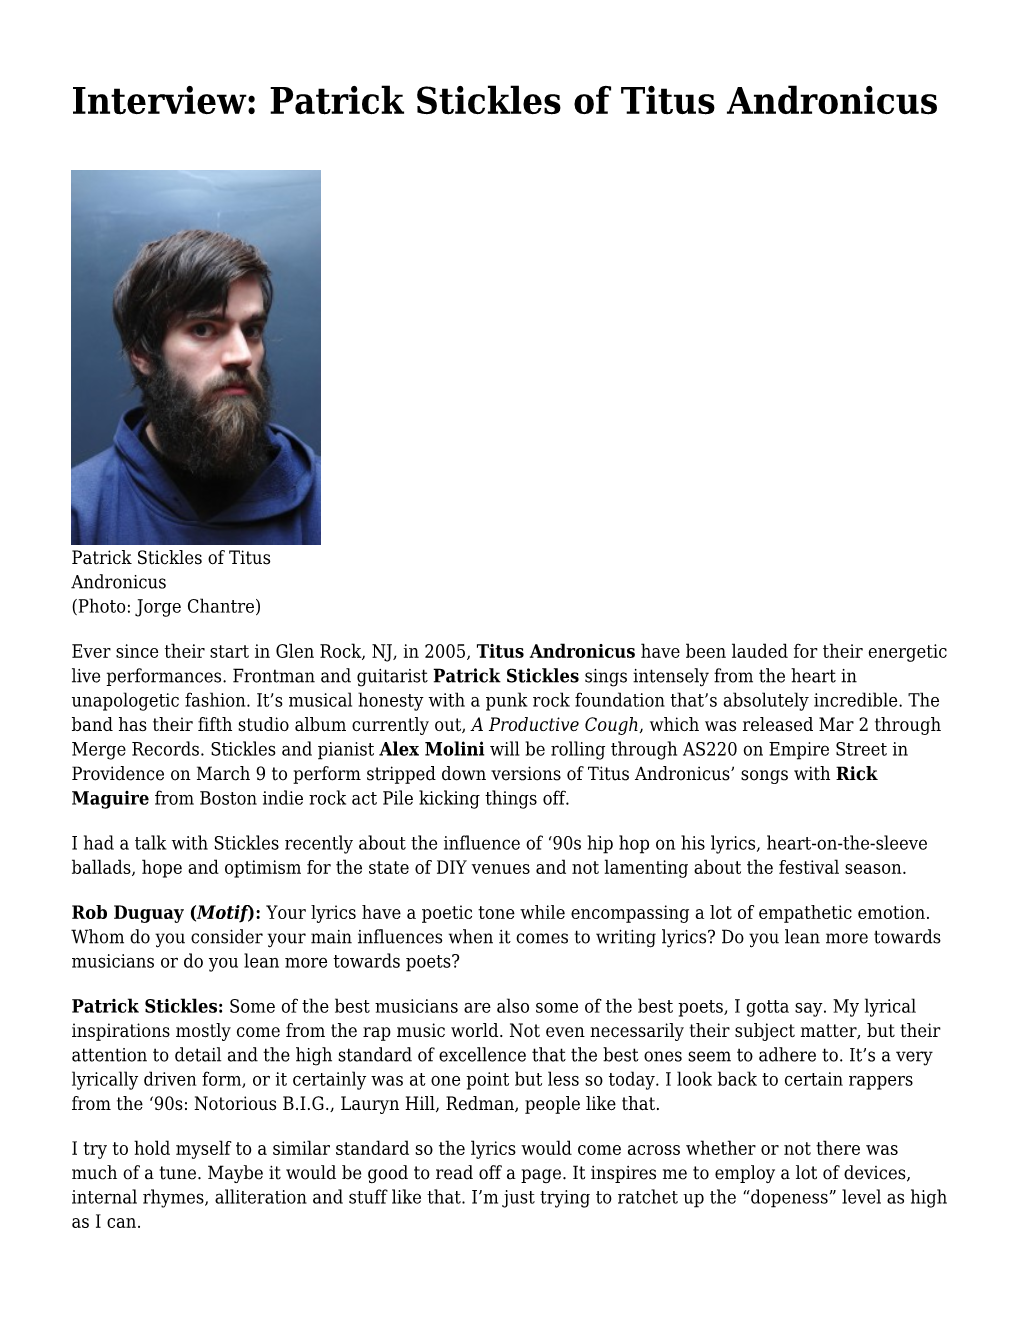 Interview: Patrick Stickles of Titus Andronicus,Album of the Week